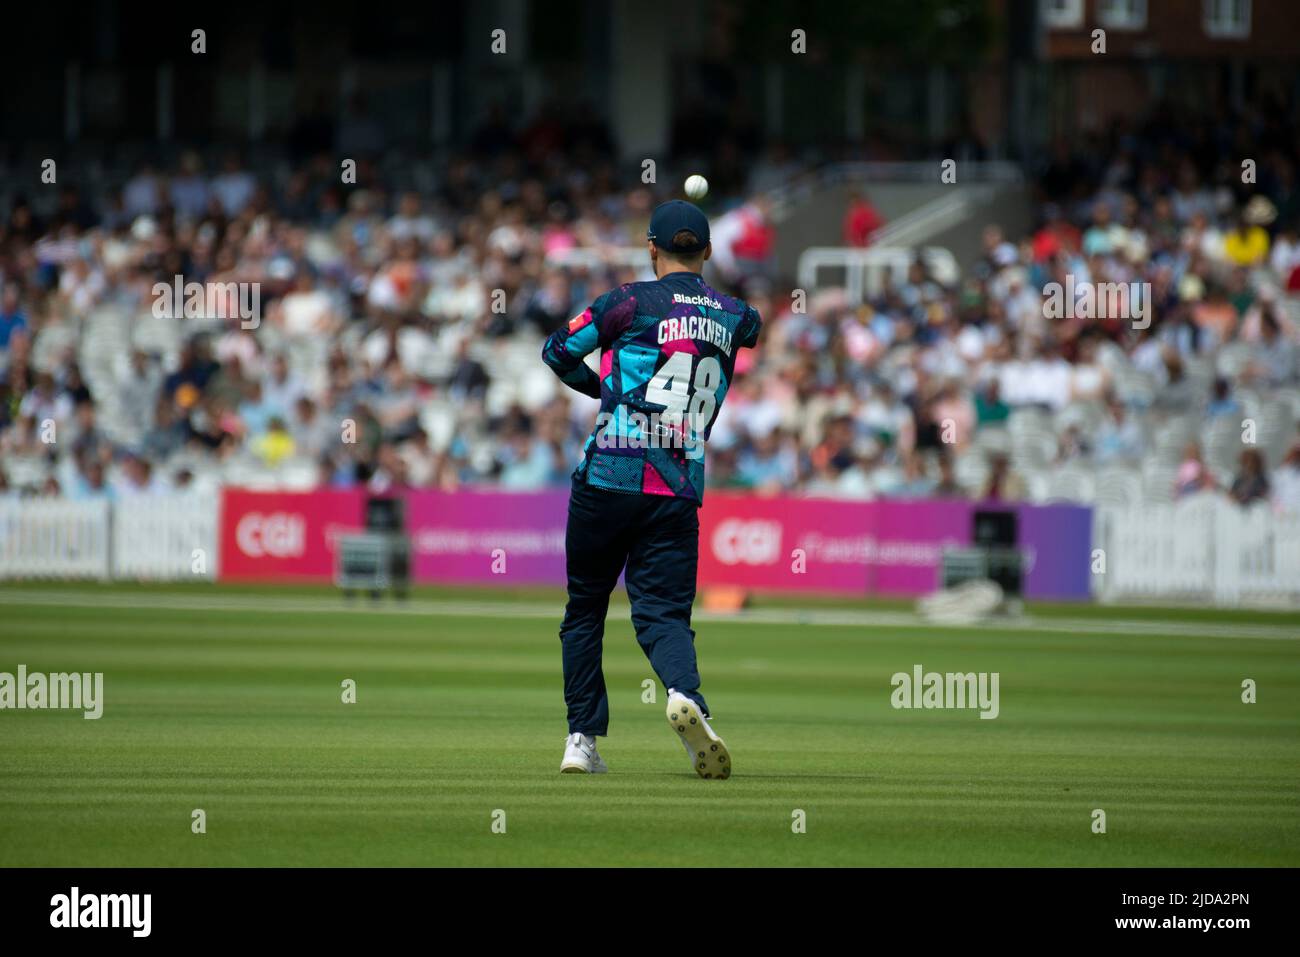 Joe Cracknell fields at Lords in the Vitality T20 Blast on the 19th of June 2022 Foto Stock